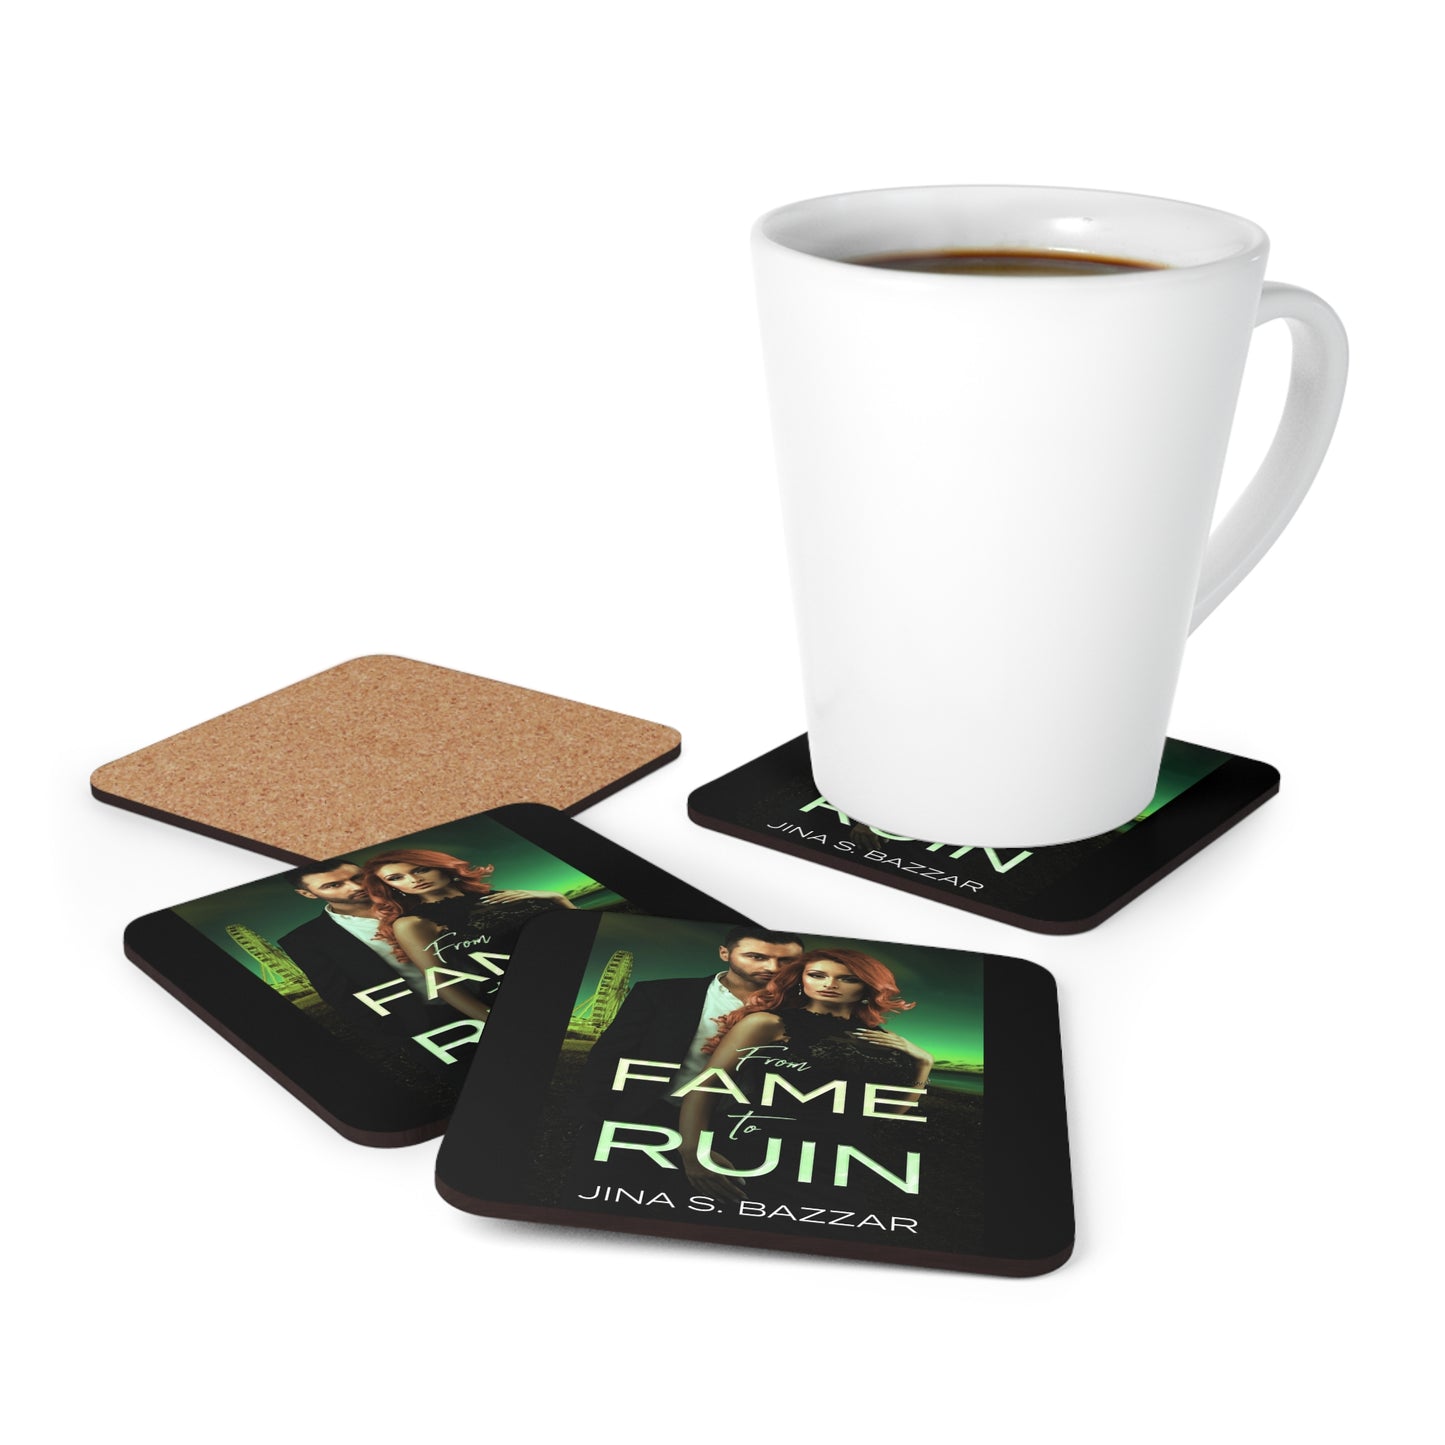 From Fame To Ruin - Corkwood Coaster Set